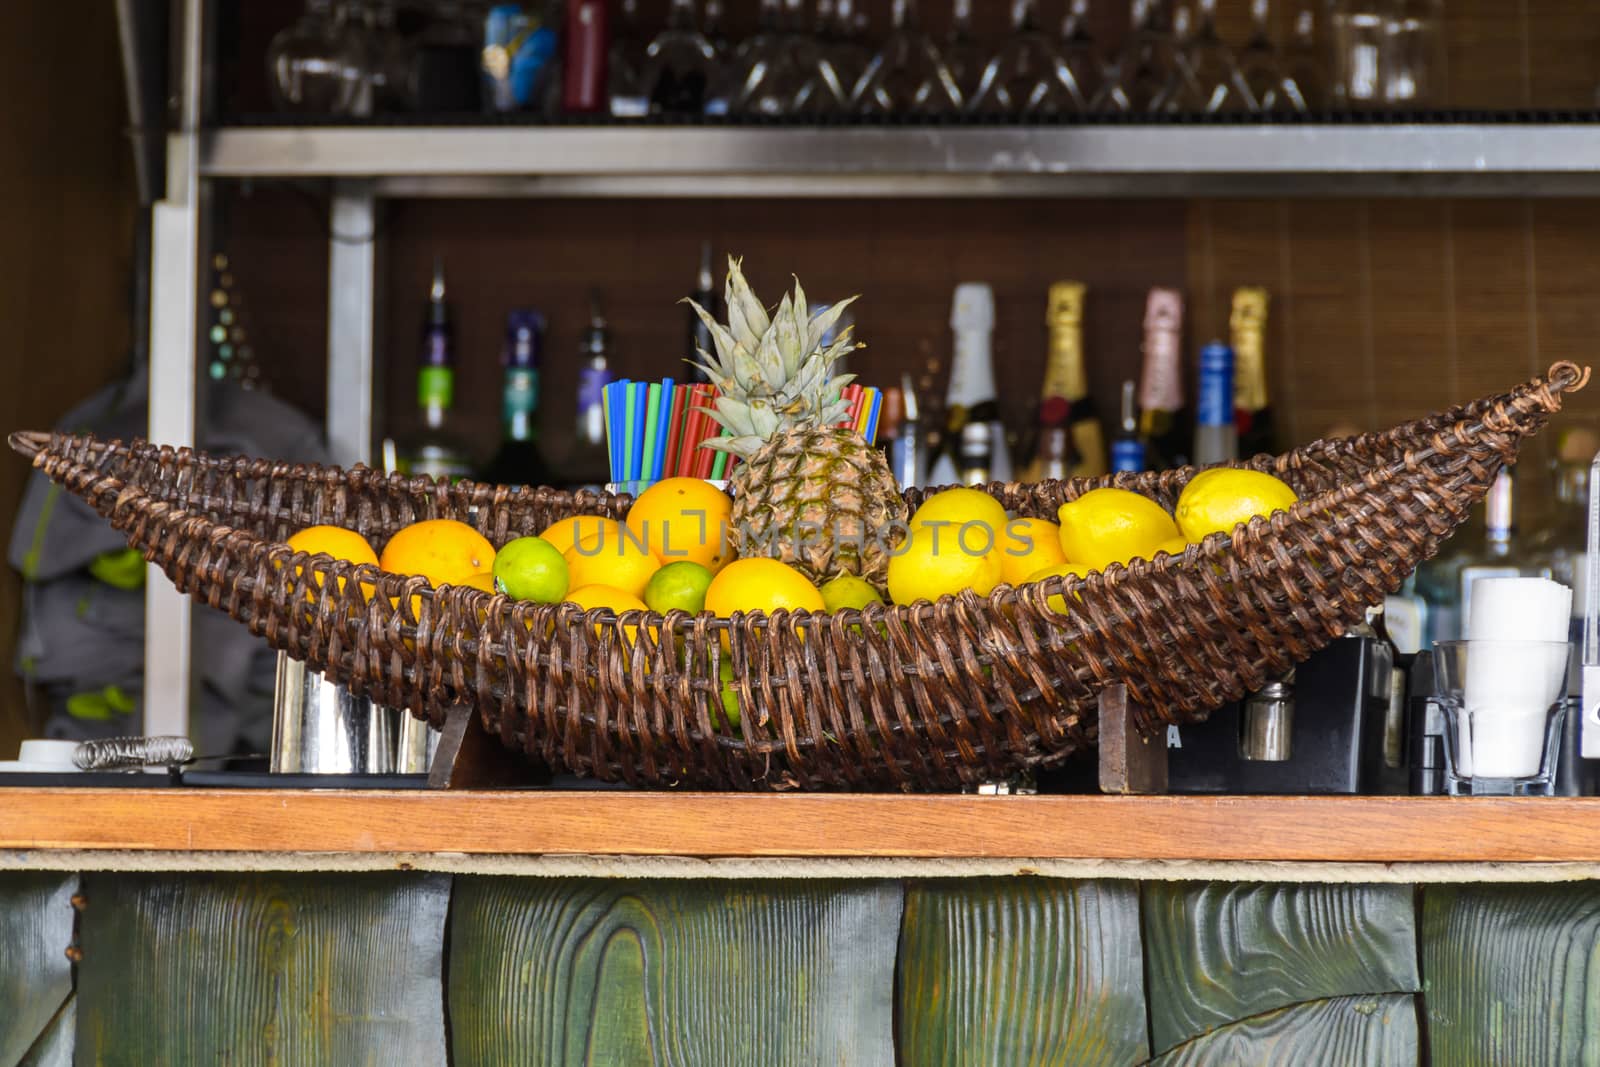 Bar counter with fruits in basket and shelfs with bottles in background